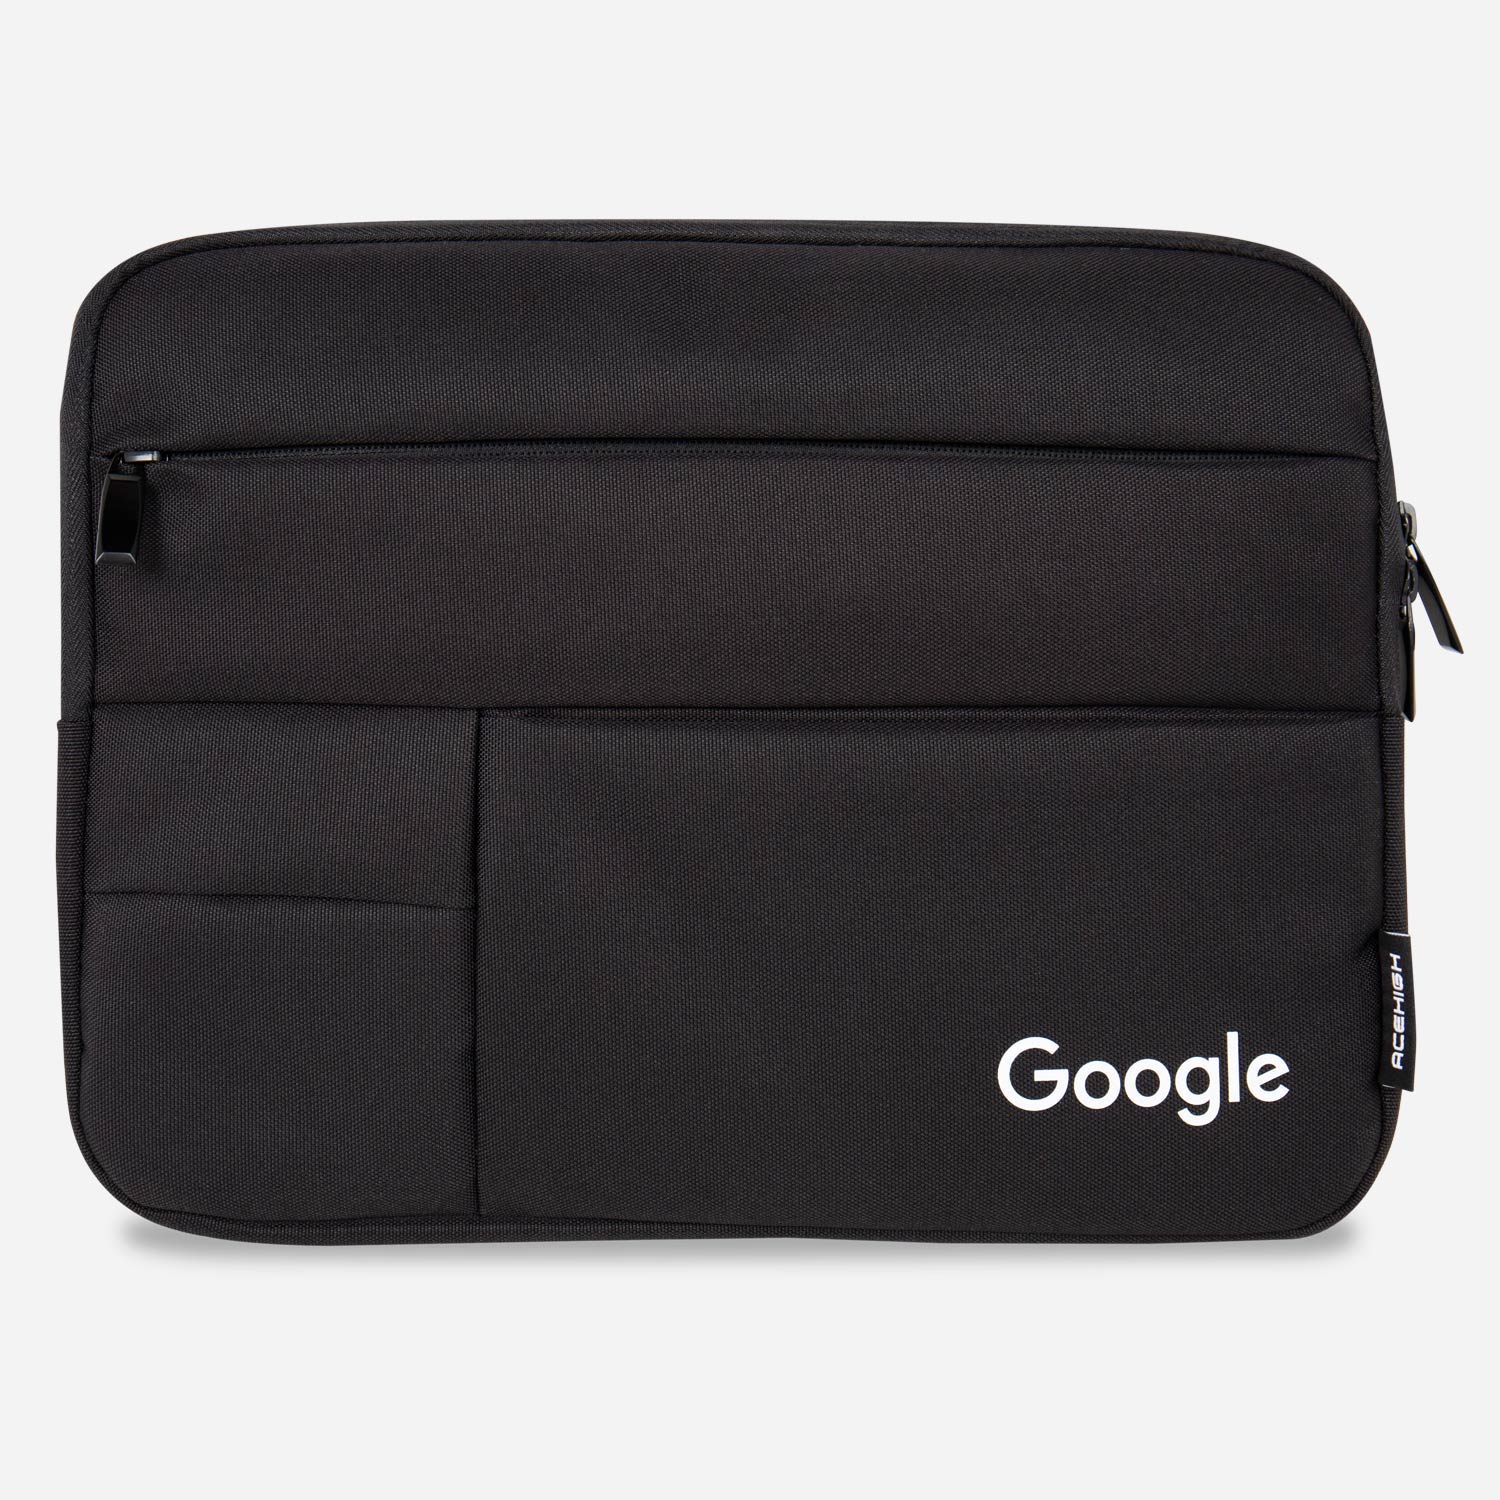 Google Cloud – Google India Swag Store by Printo